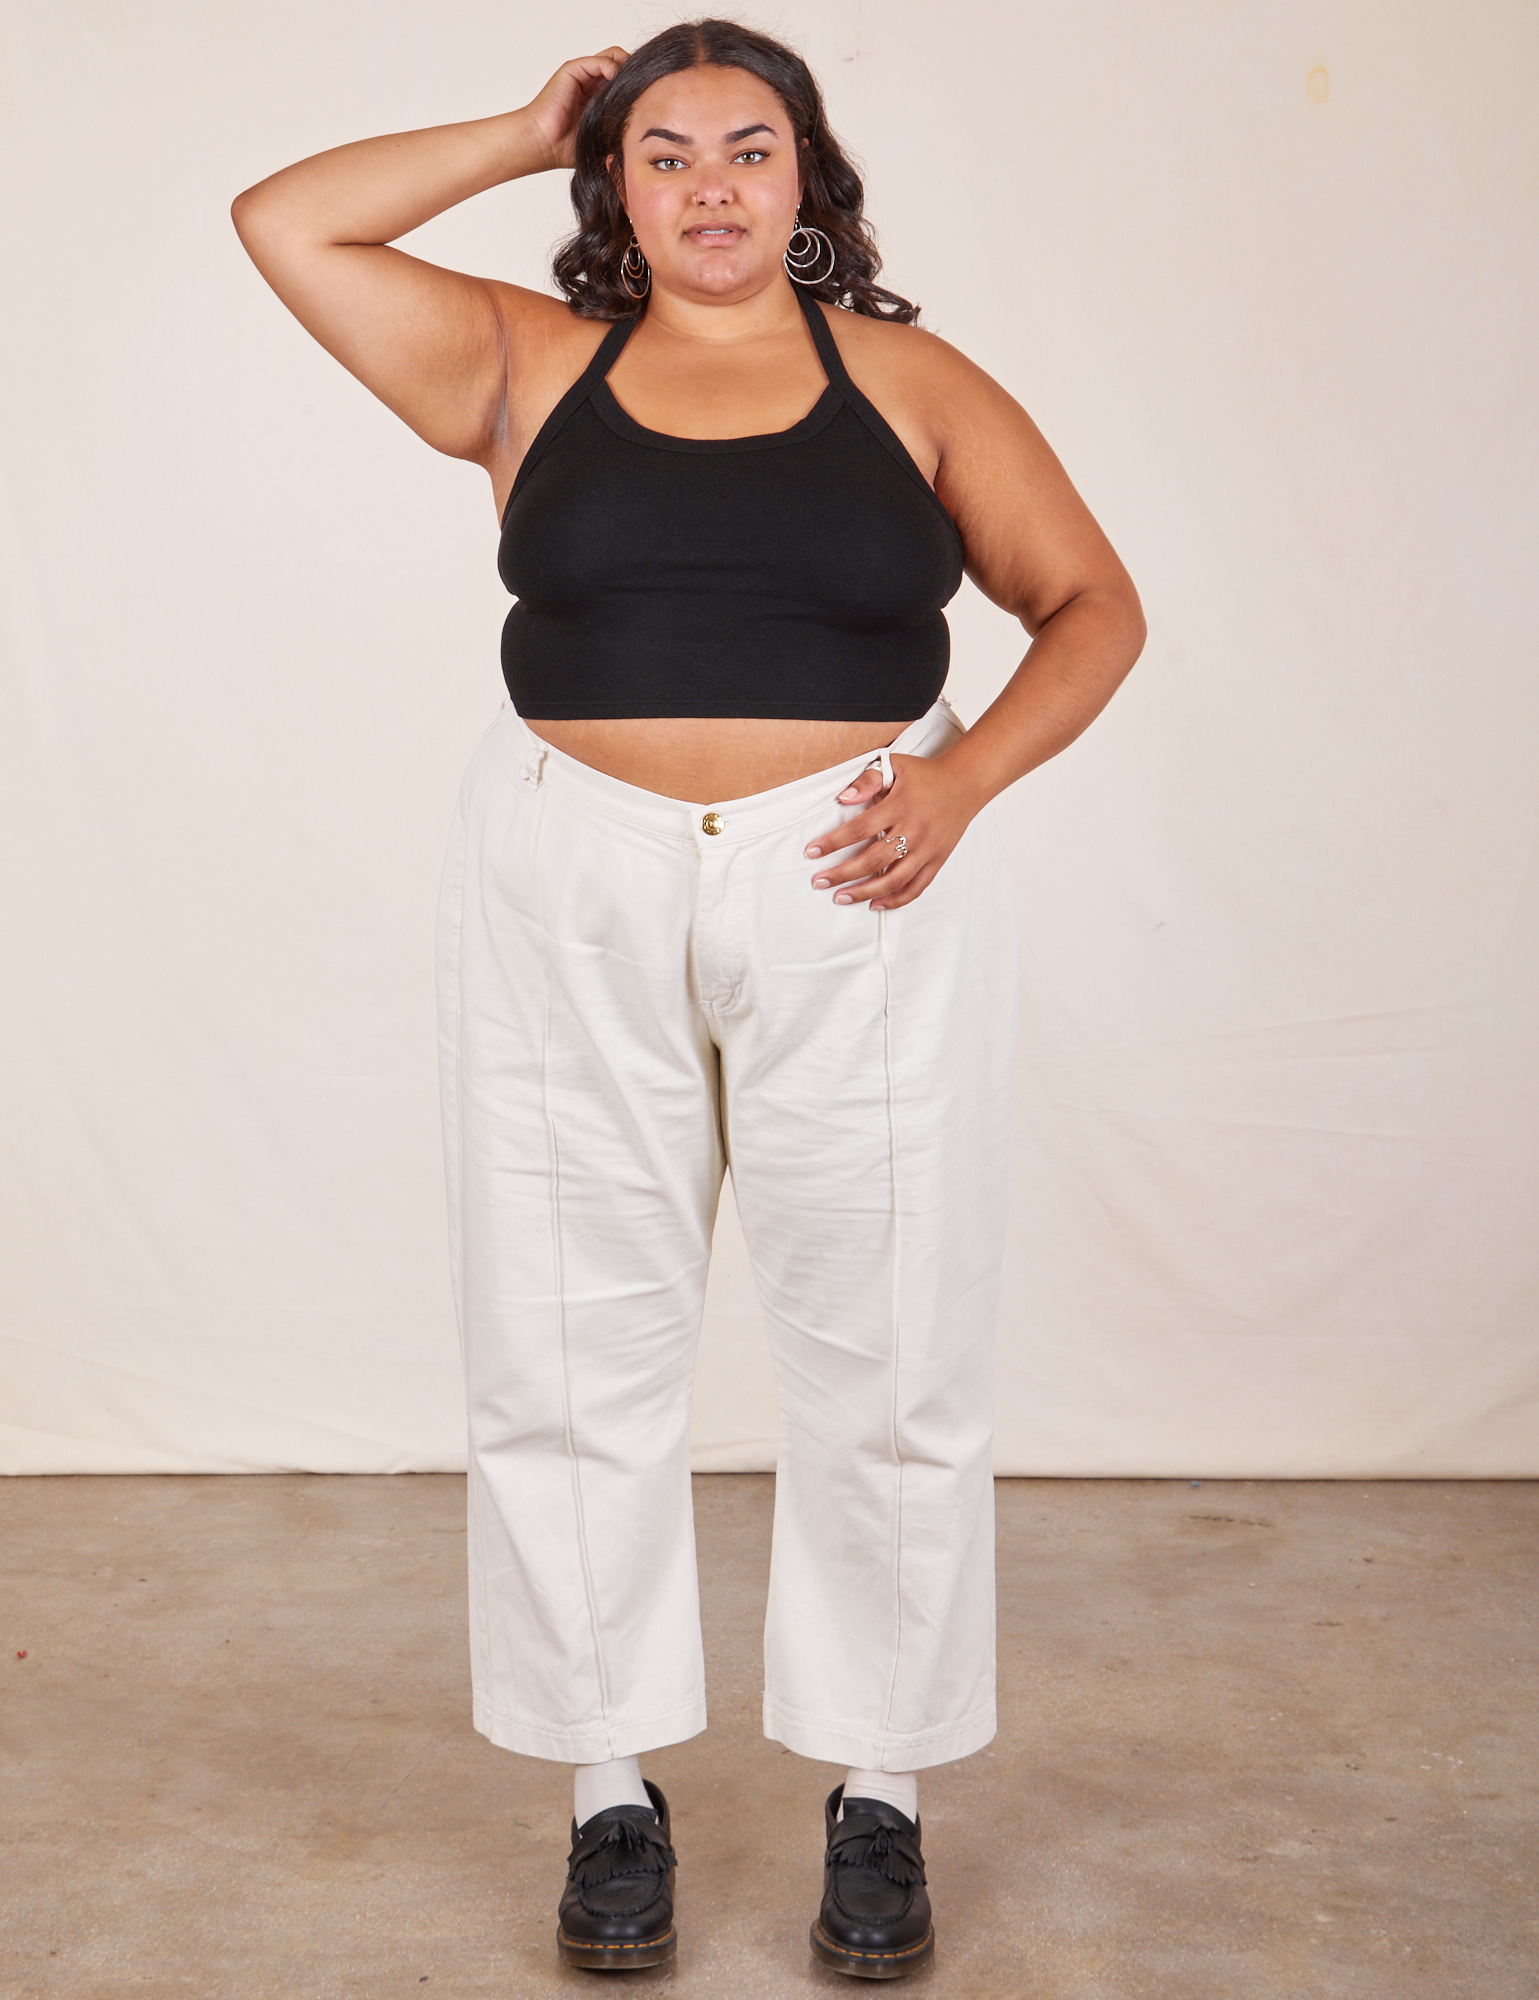 Alicia is Halter Top in Basic Black and vintage off-white Western Pants